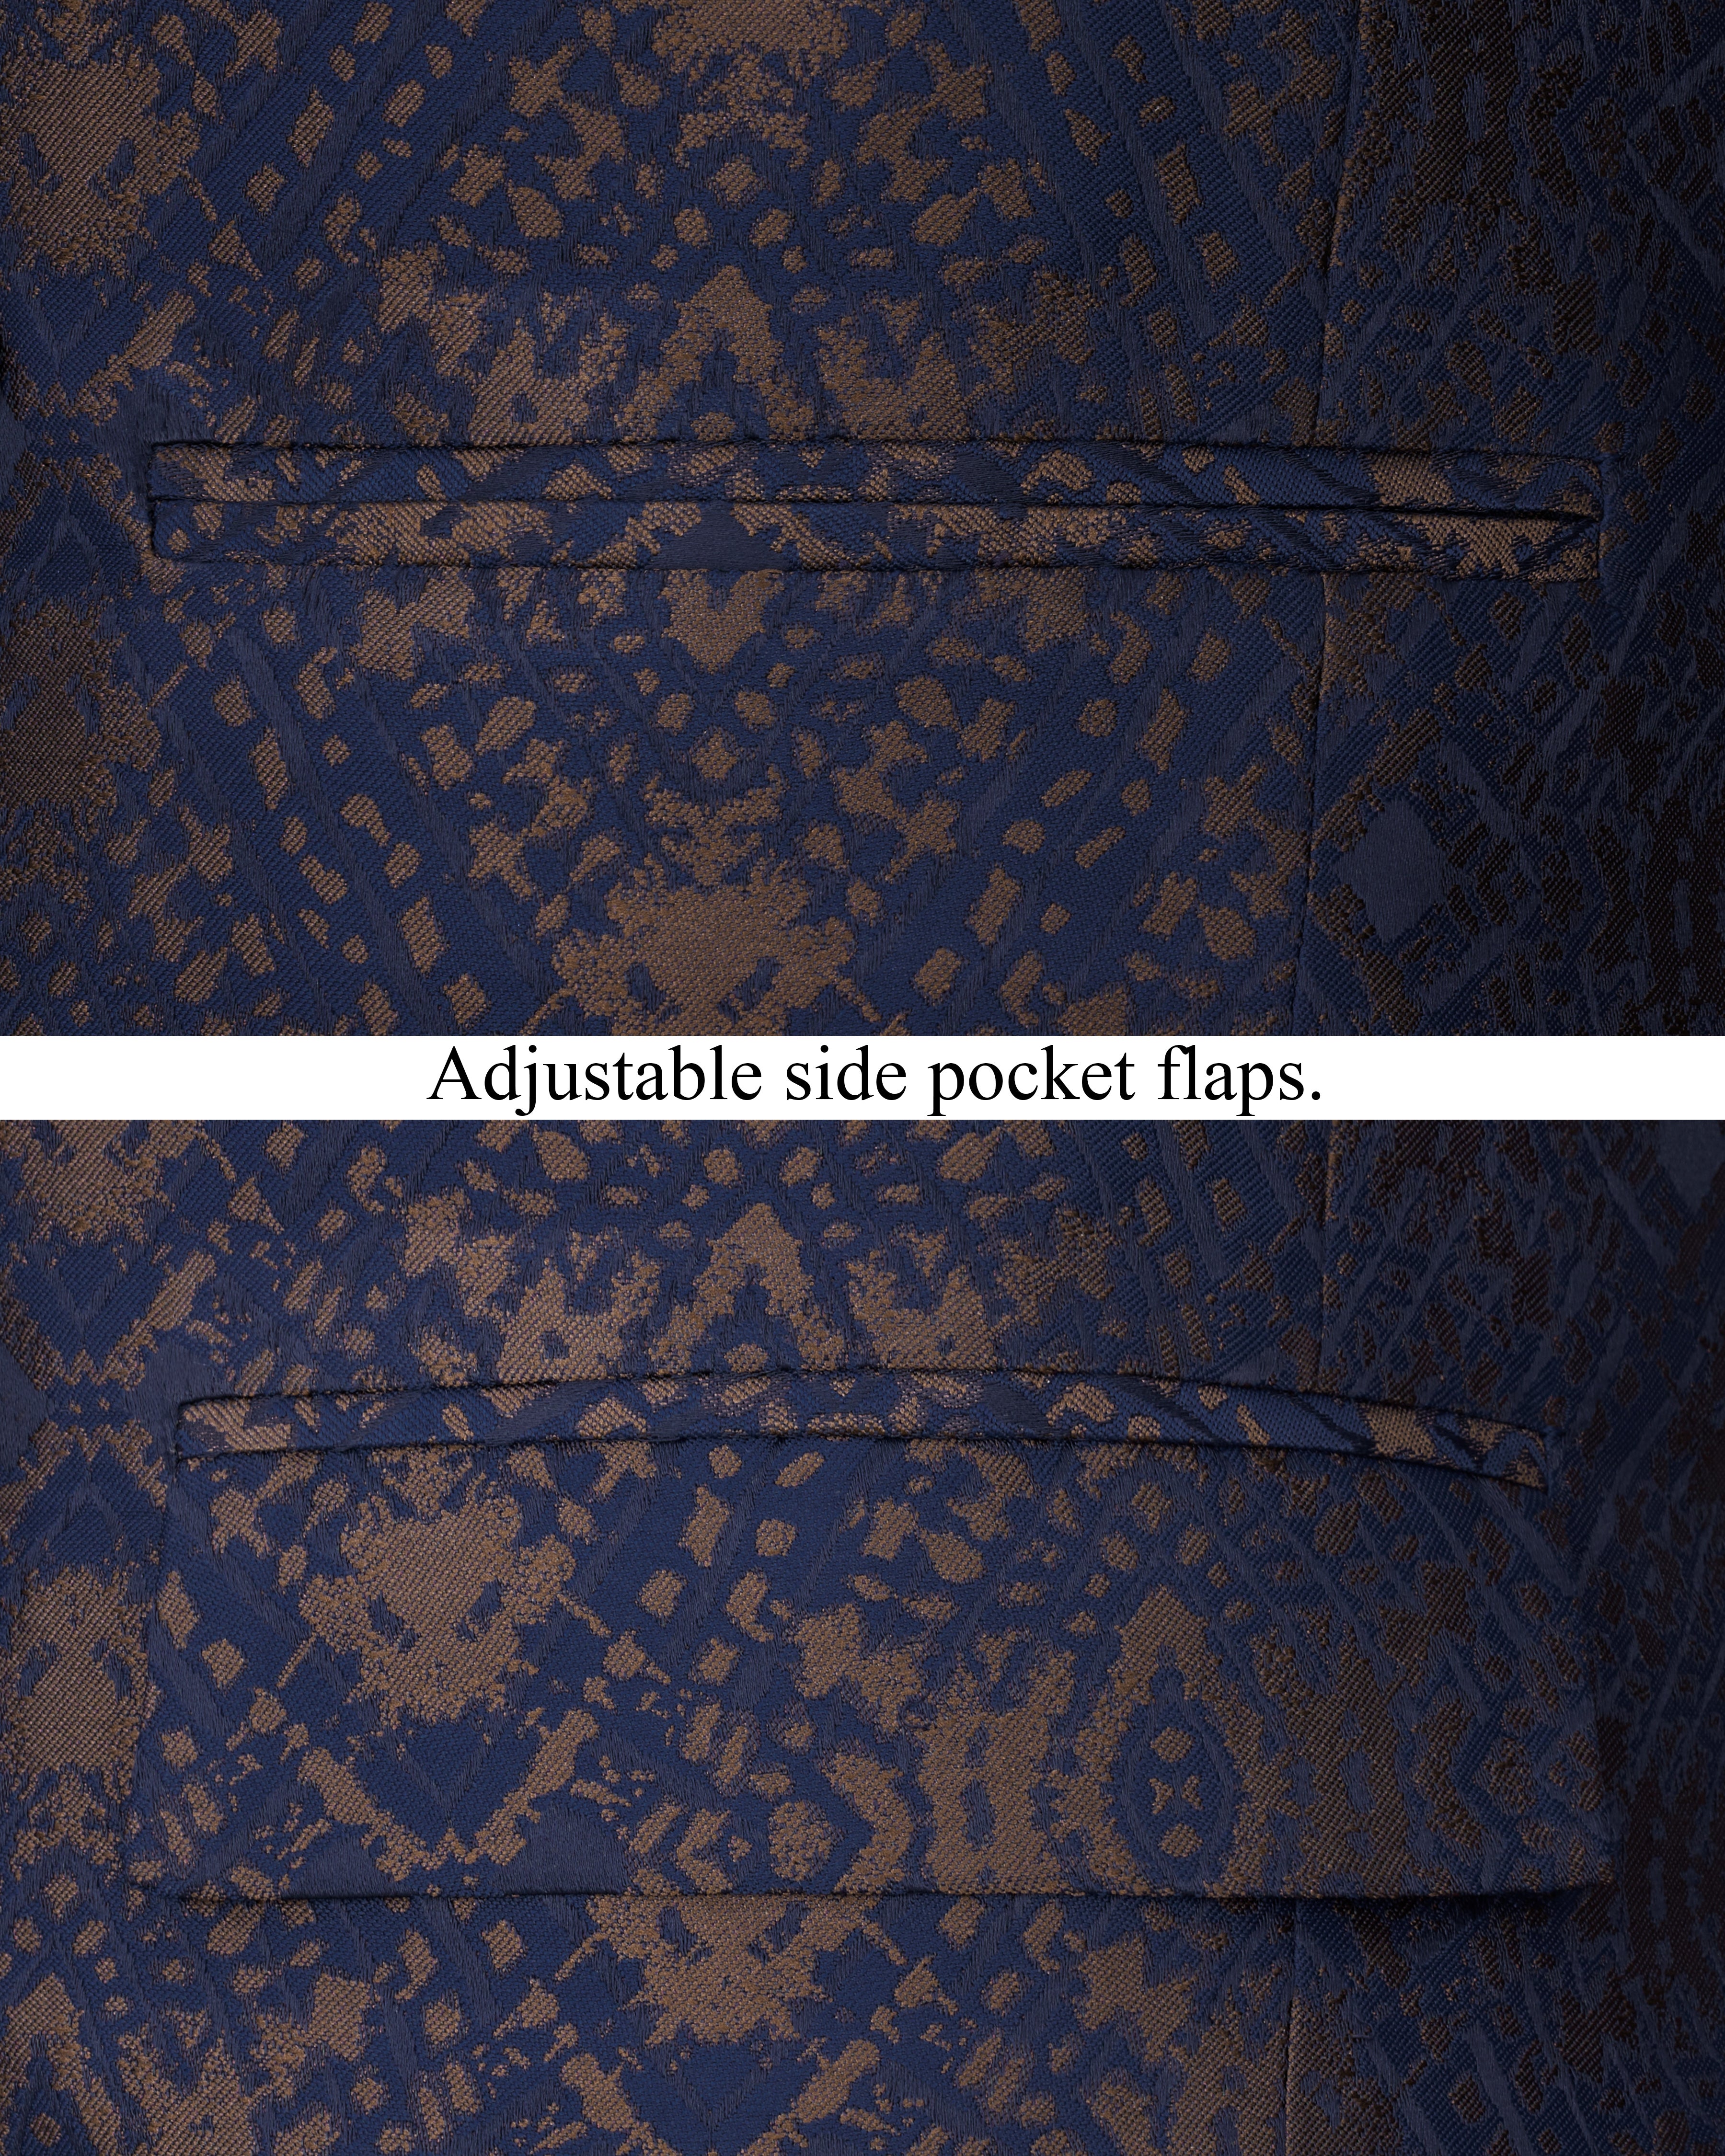 Bleached Navy Blue with Apache Gold Double Breasted Jacquard Textured Designer Blazer BL2354-DB-D212-36, BL2354-DB-D212-38, BL2354-DB-D212-40, BL2354-DB-D212-42, BL2354-DB-D212-44, BL2354-DB-D212-46, BL2354-DB-D212-48, BL2354-DB-D212-50, BL2354-DB-D212-52, BL2354-DB-D212-54, BL2354-DB-D212-56, BL2354-DB-D212-58, BL2354-DB-D212-60			